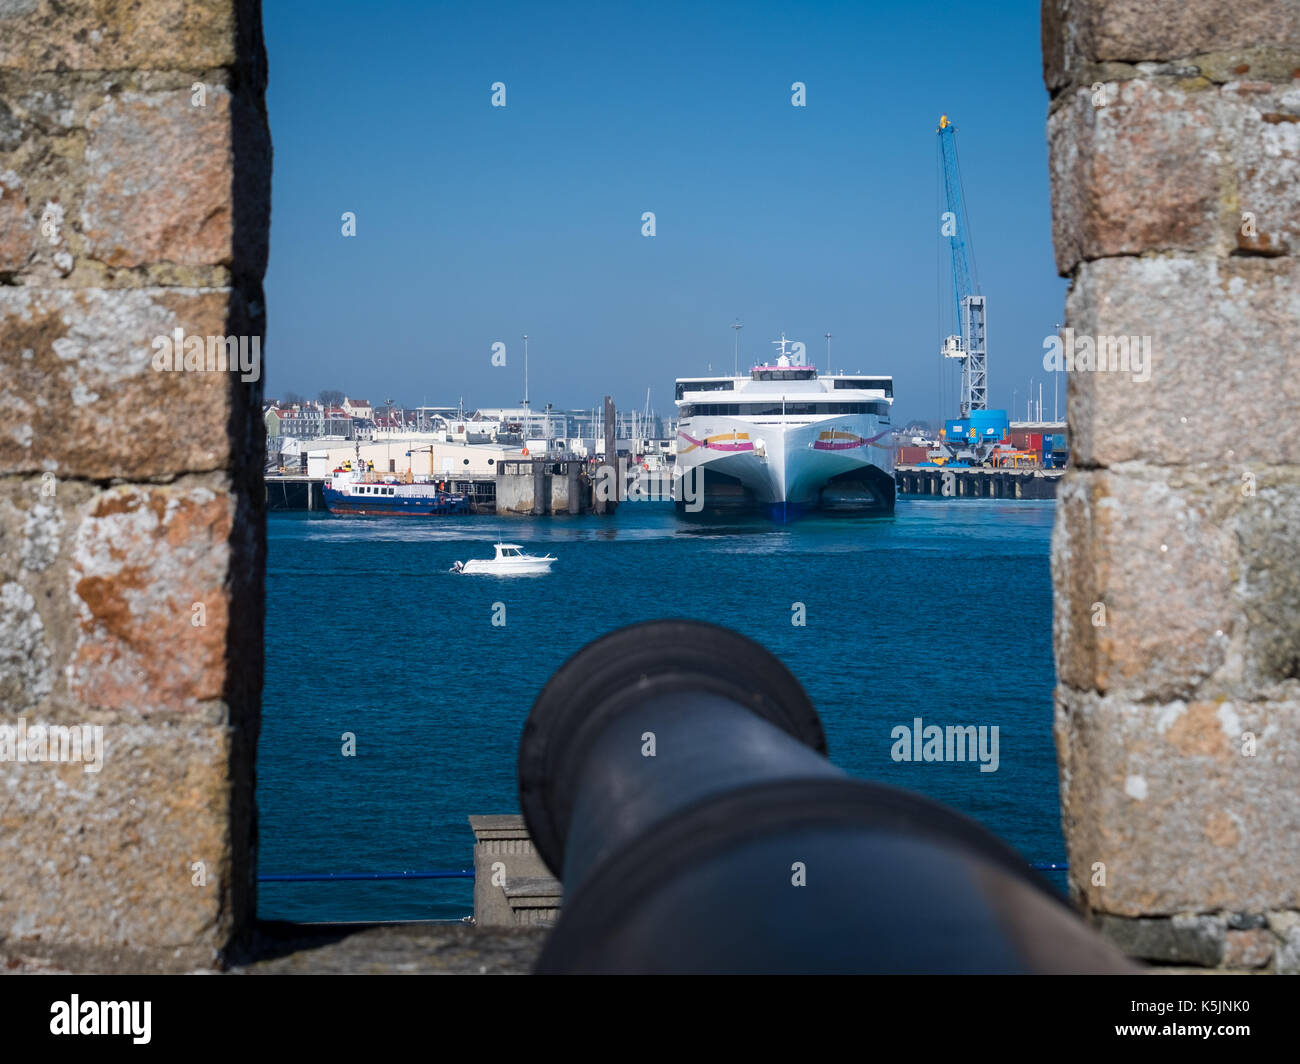 A view of the cross channel ferry, Condor Liberation in St Peter Port in Guernsey, Channel Islands Stock Photo